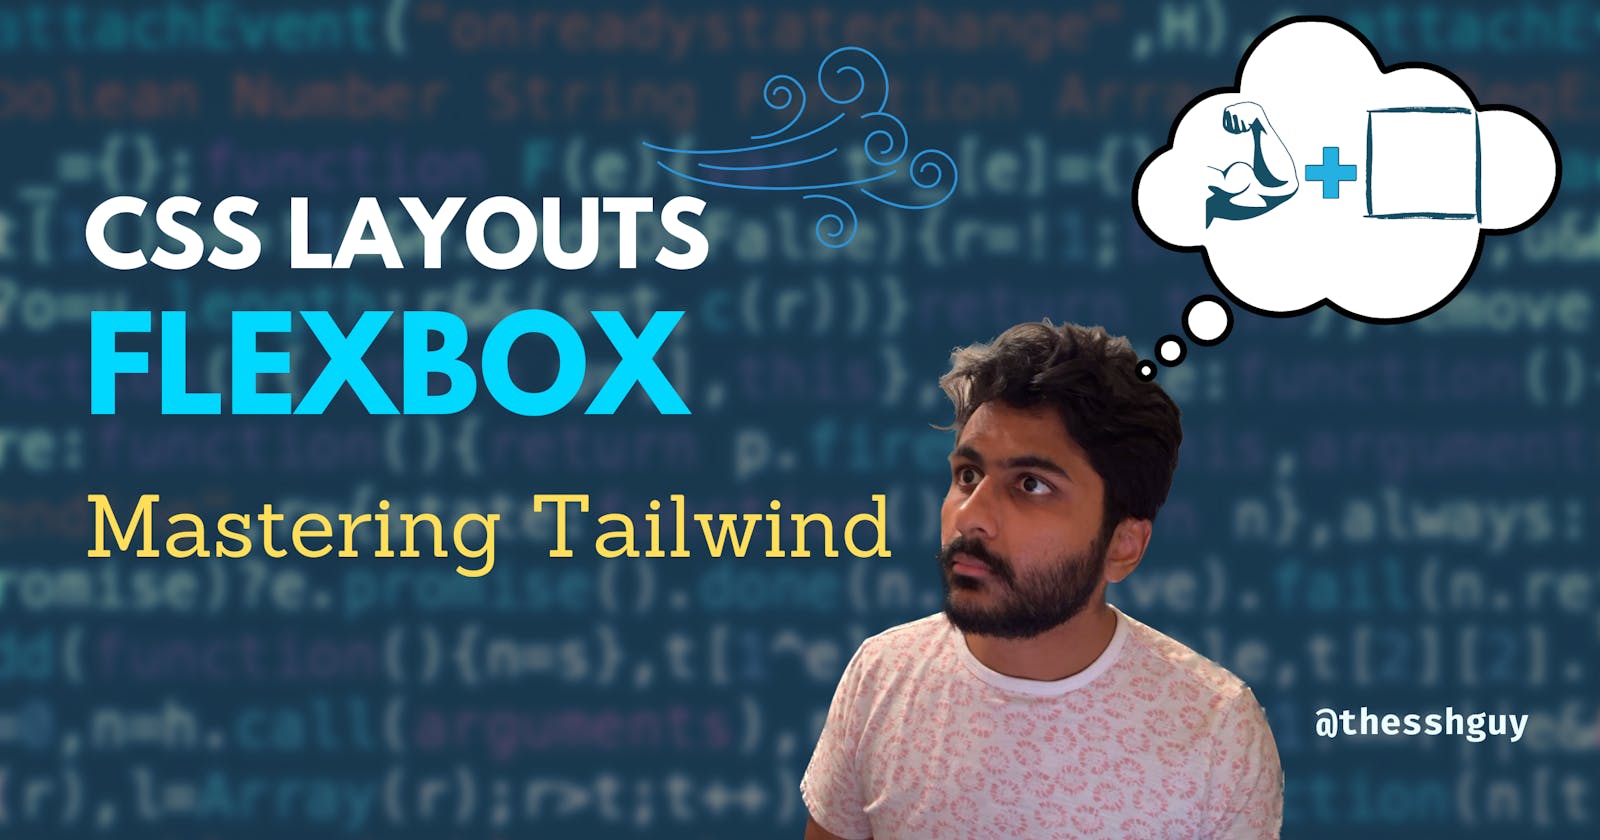 How to Use CSS Flexbox with Tailwind: An Interactive Guide